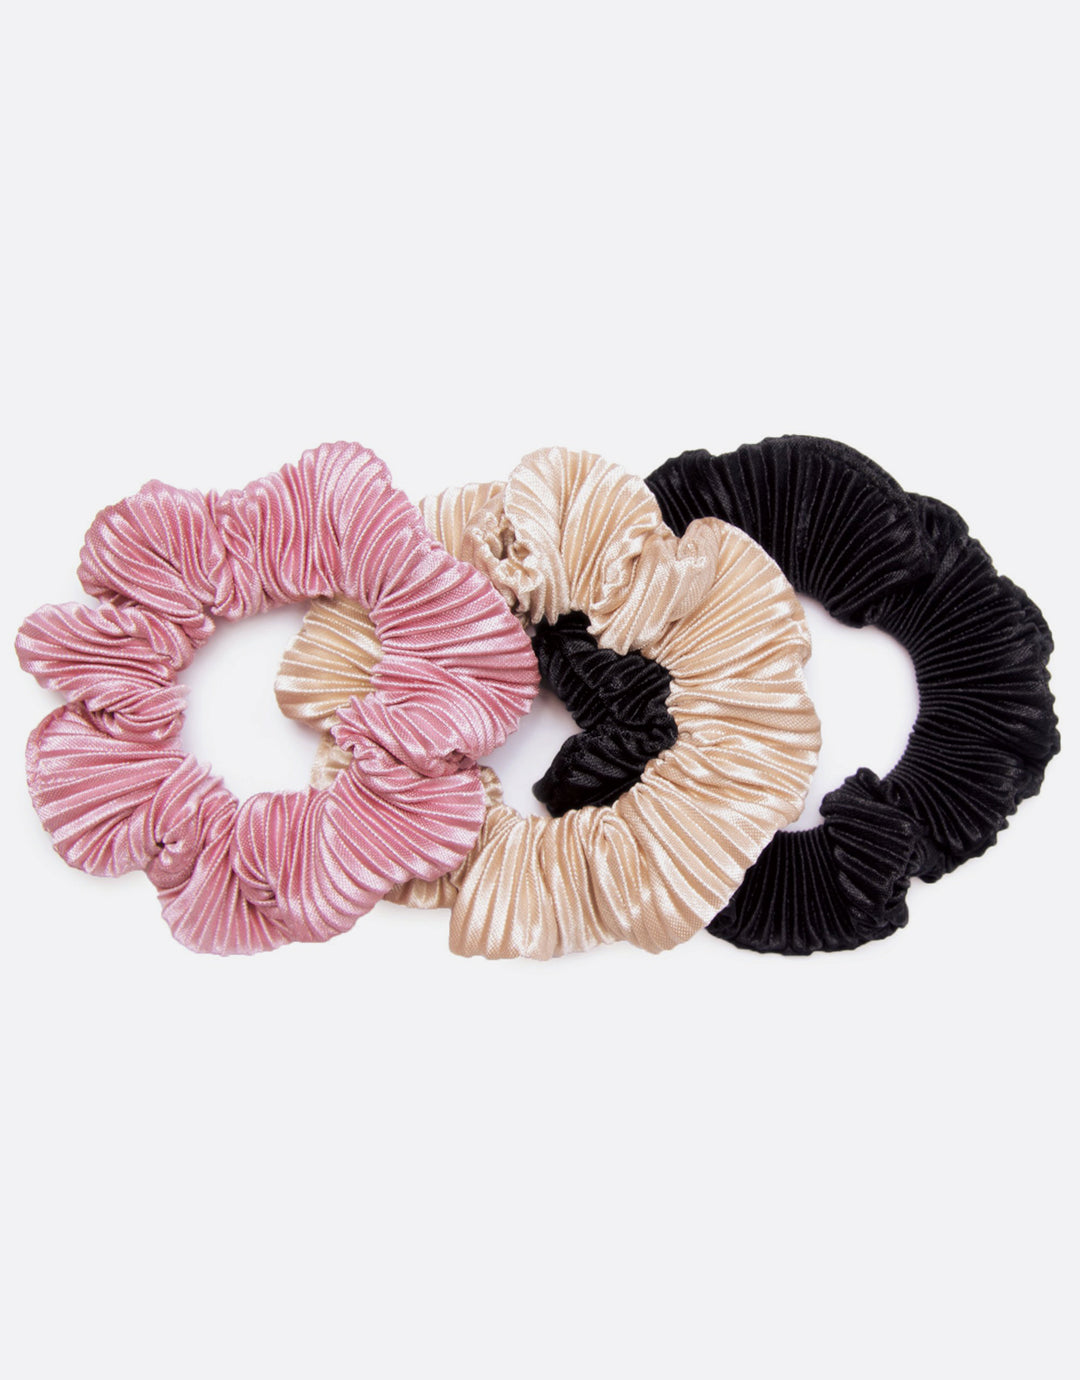 BANDED Women’s Premium Hair Accessories - Island Time - 3 Pack Pleated Satin Scrunchies